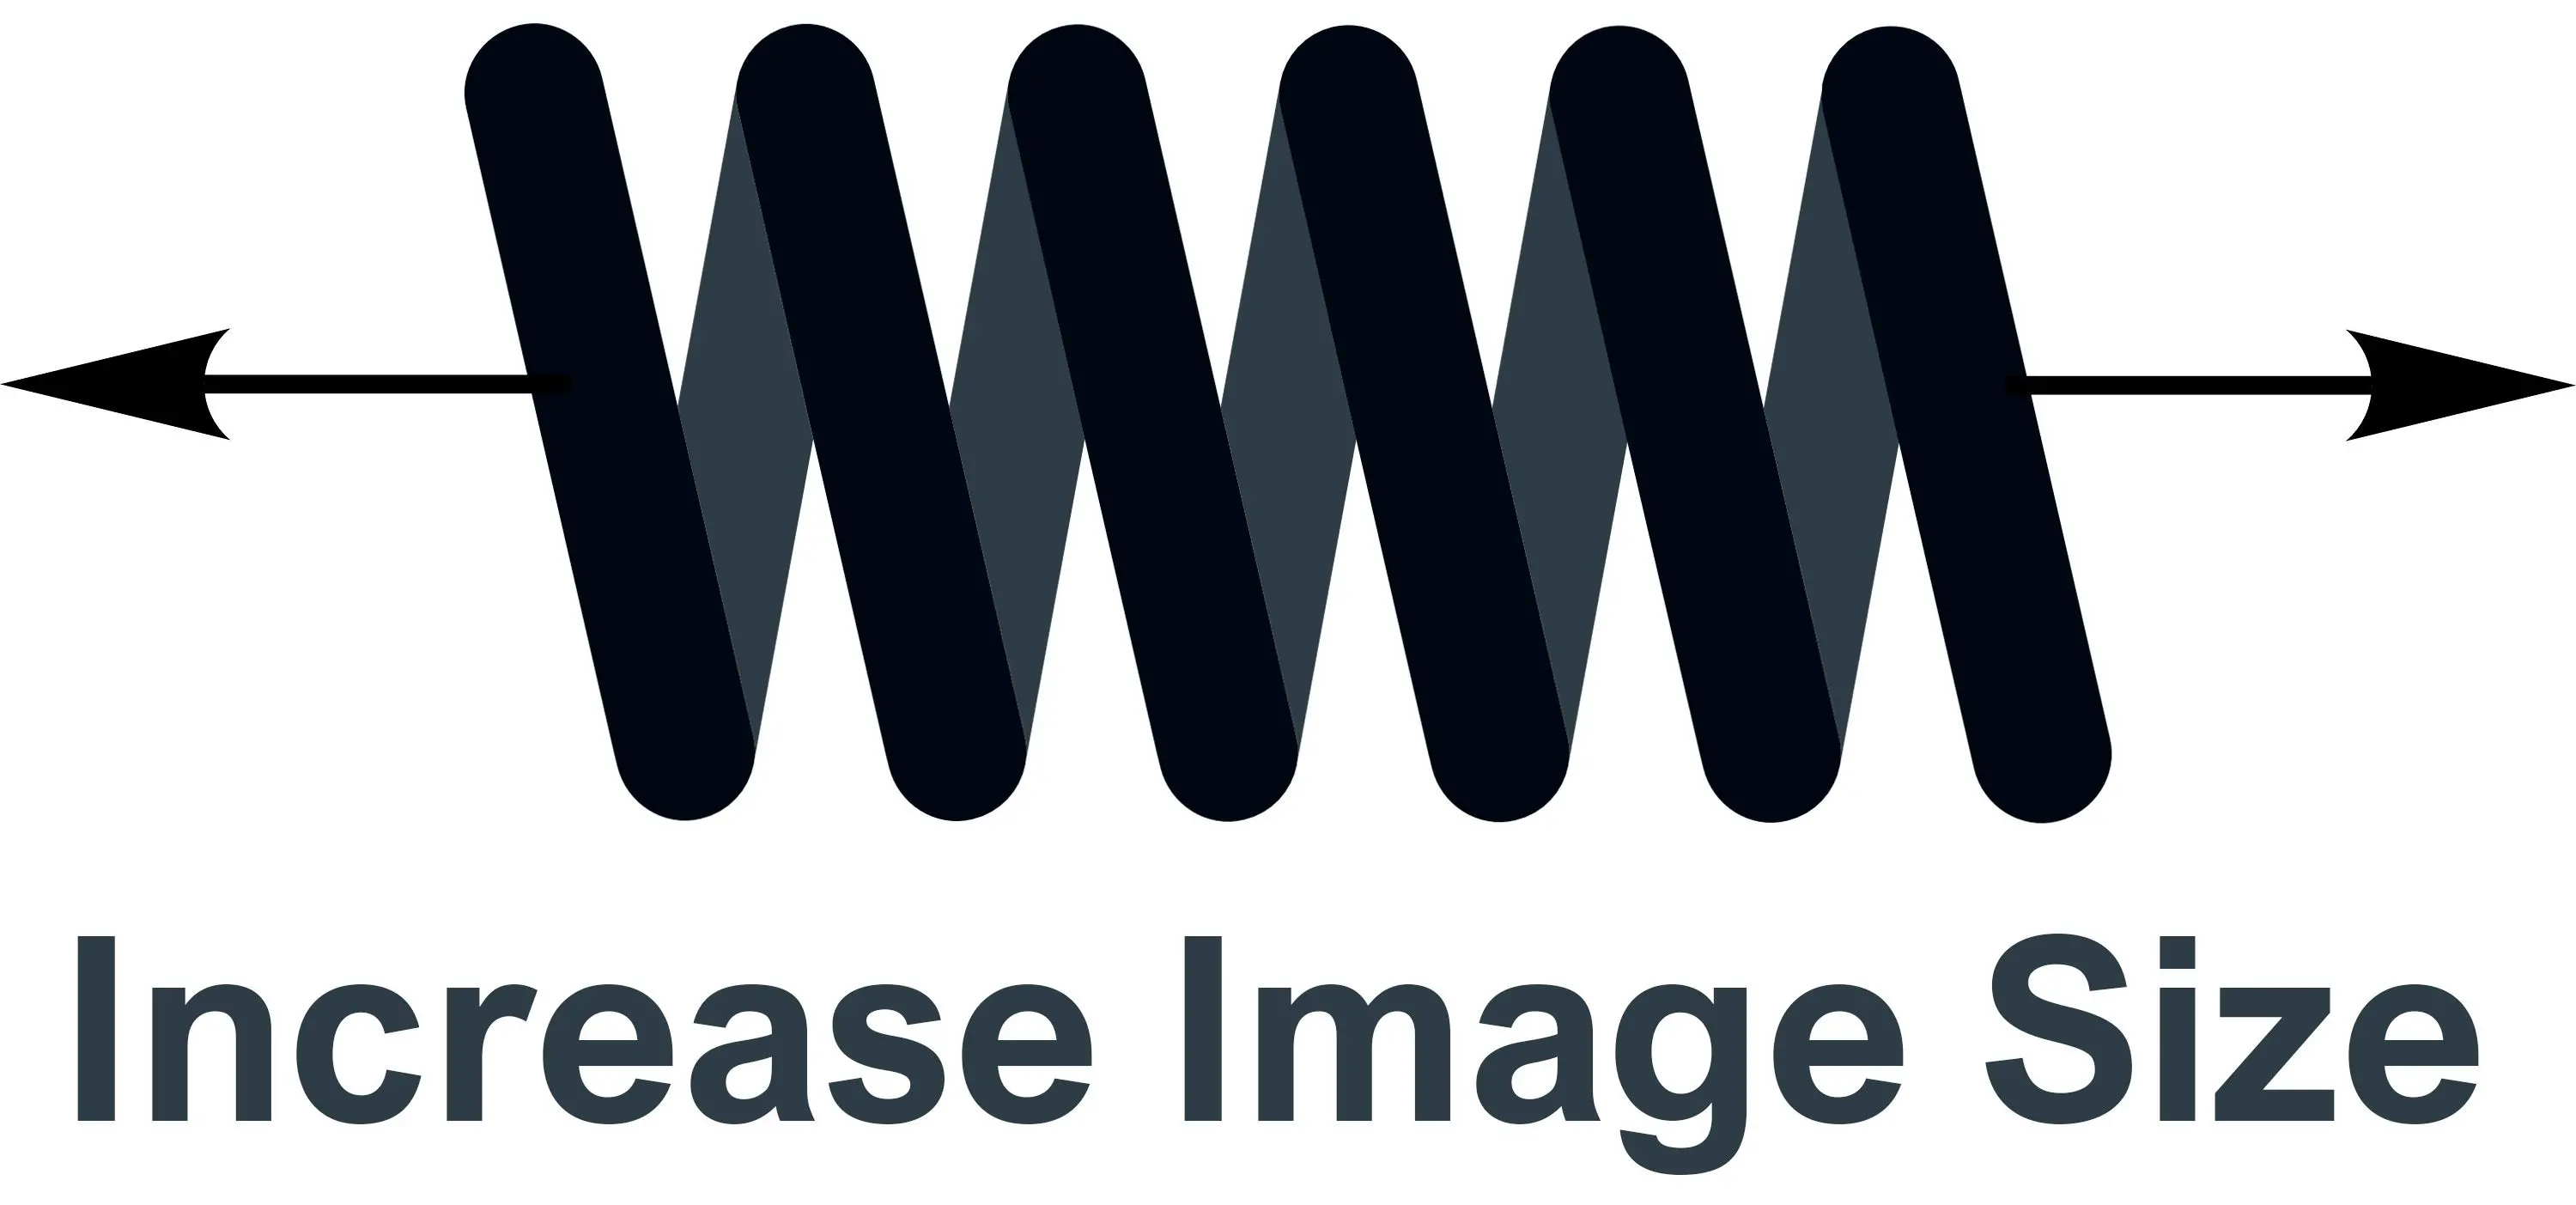 Increase Image Size from KB to MB..